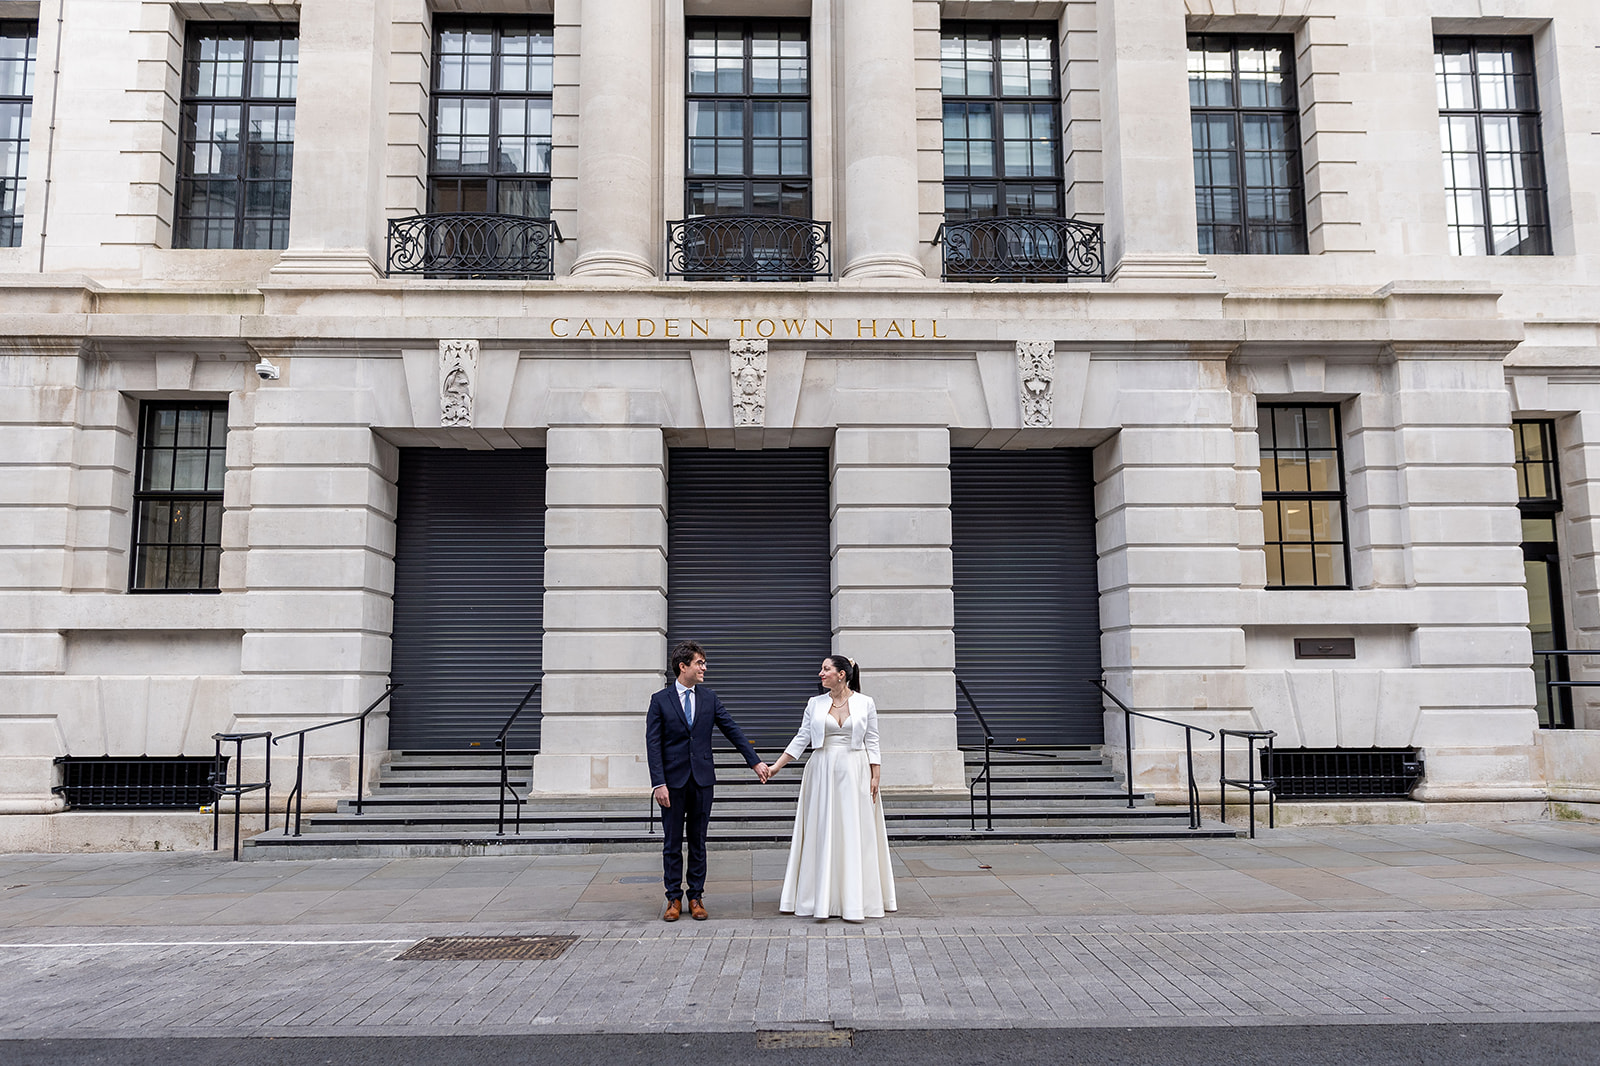 Bride and groom in front of Camden Town Hall